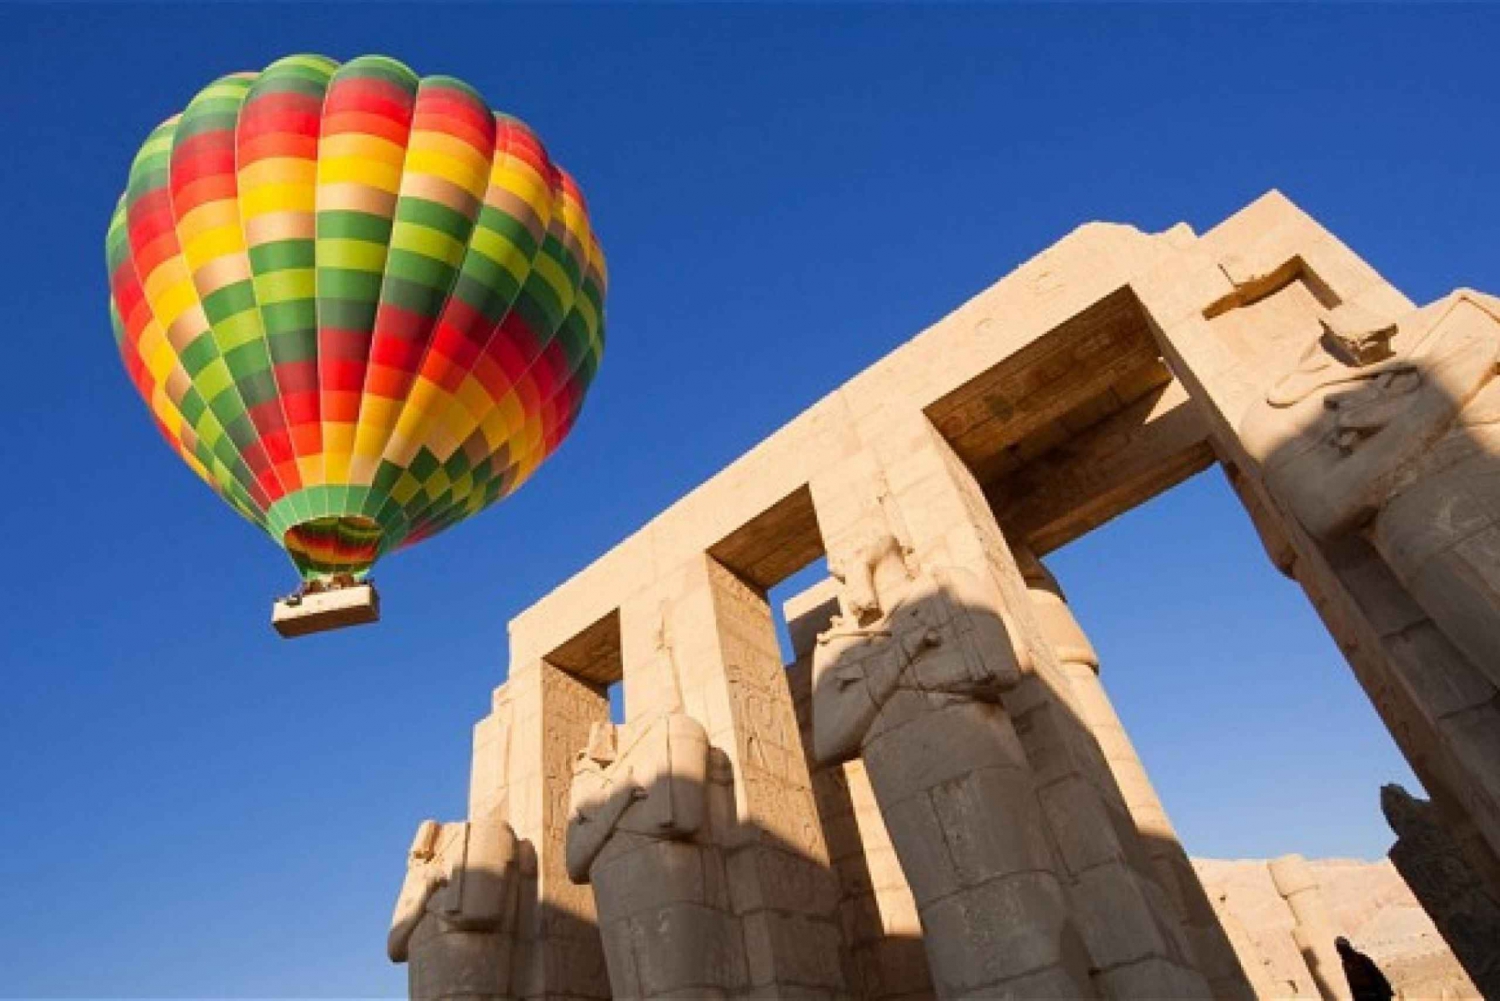 Cairo: 3-Day River Nile Cruise with Hot Air Balloon